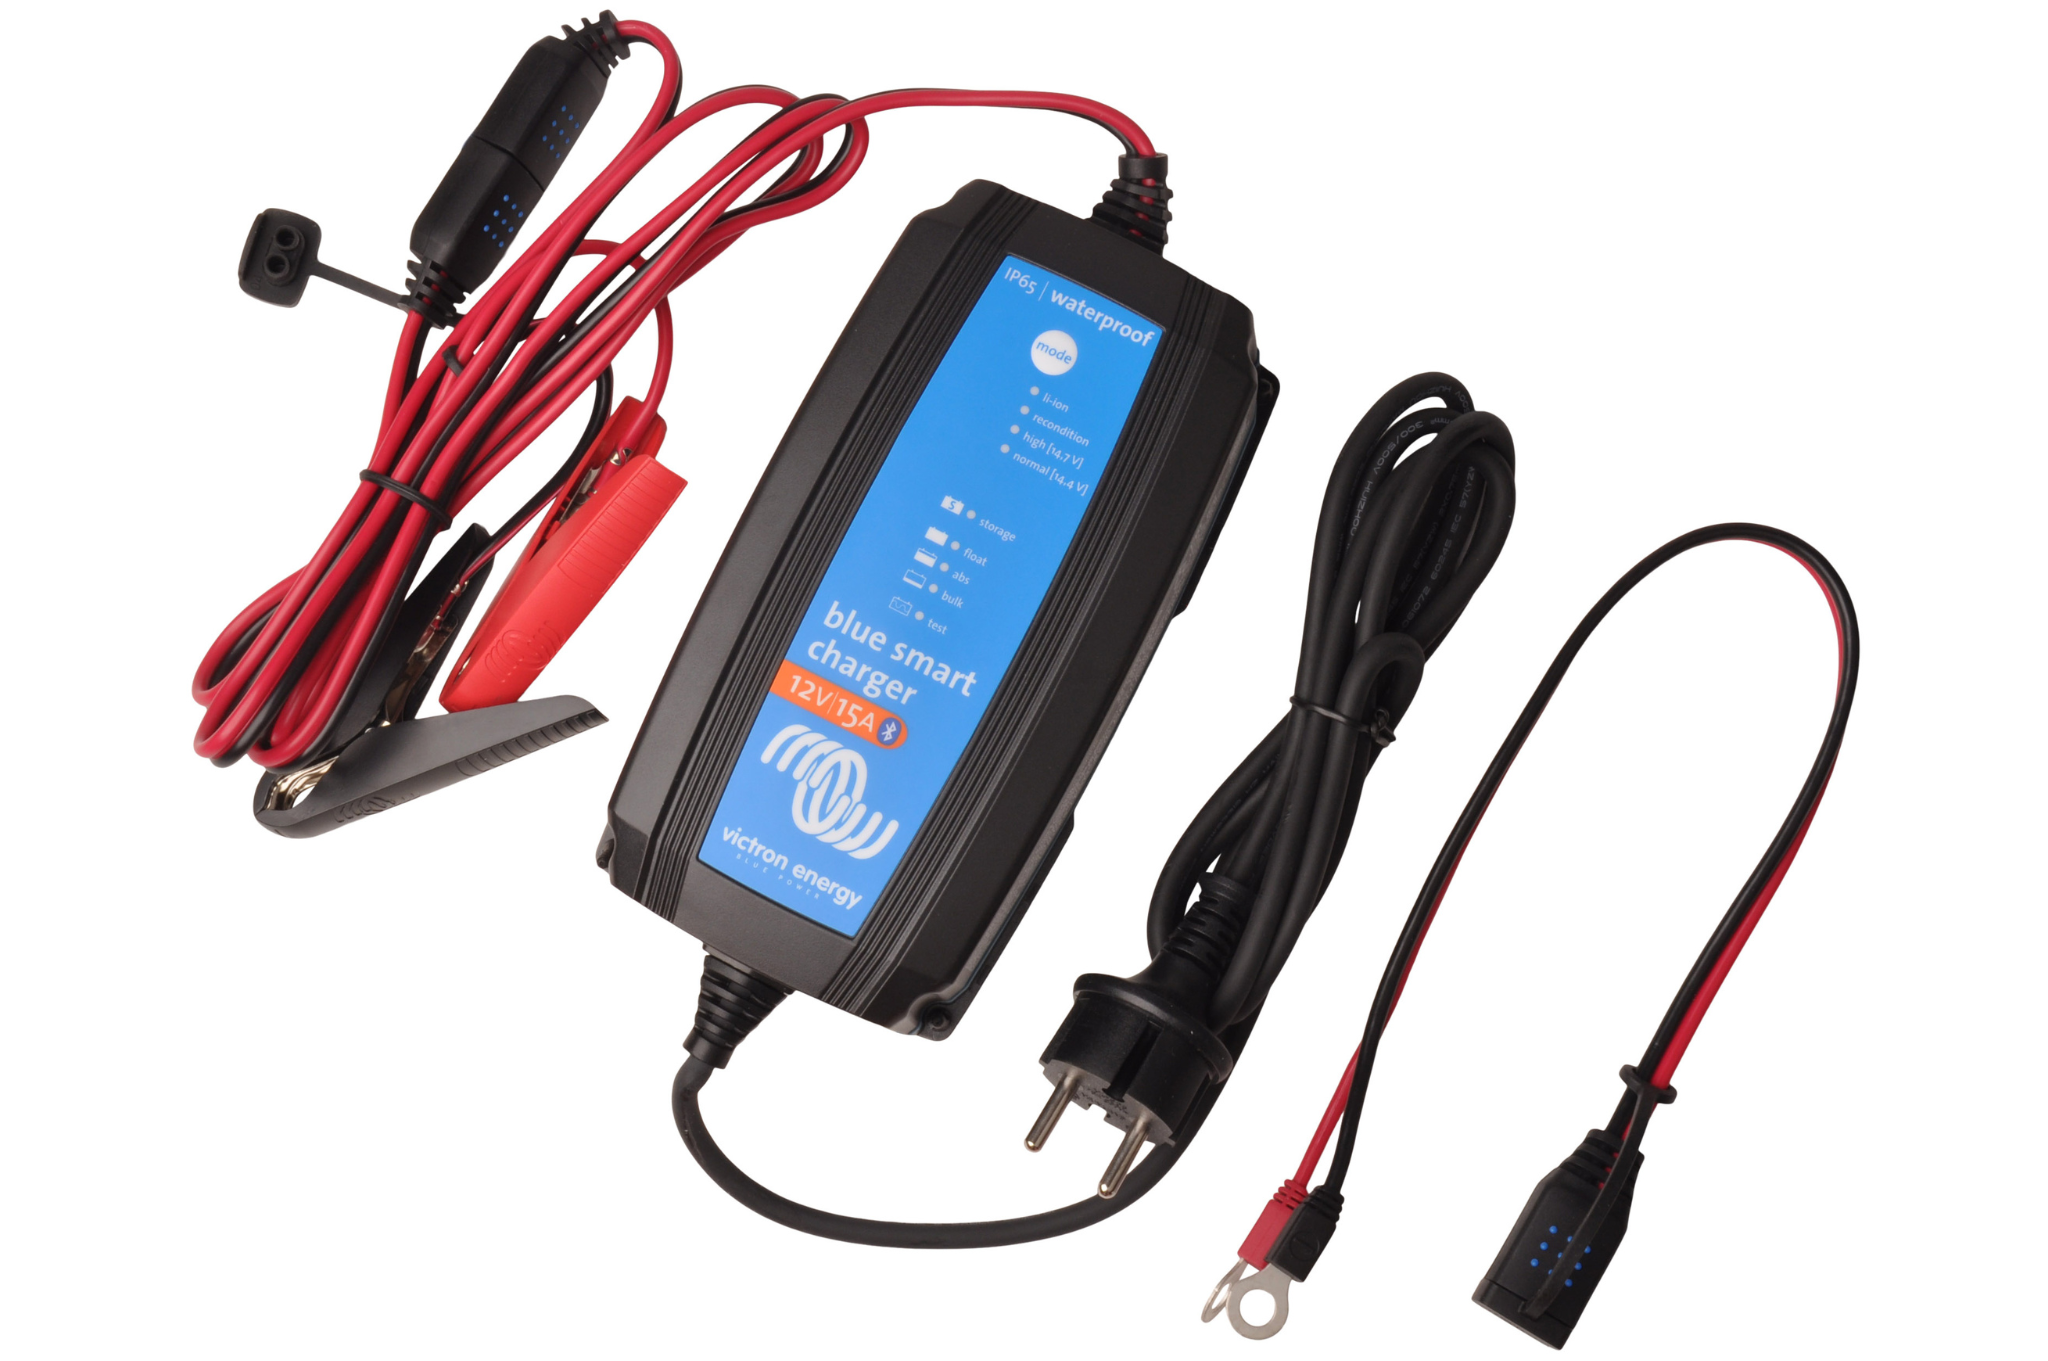 Victron energy Victron Blue Smart Battery charger - 15 amps - input voltage  230 VAC